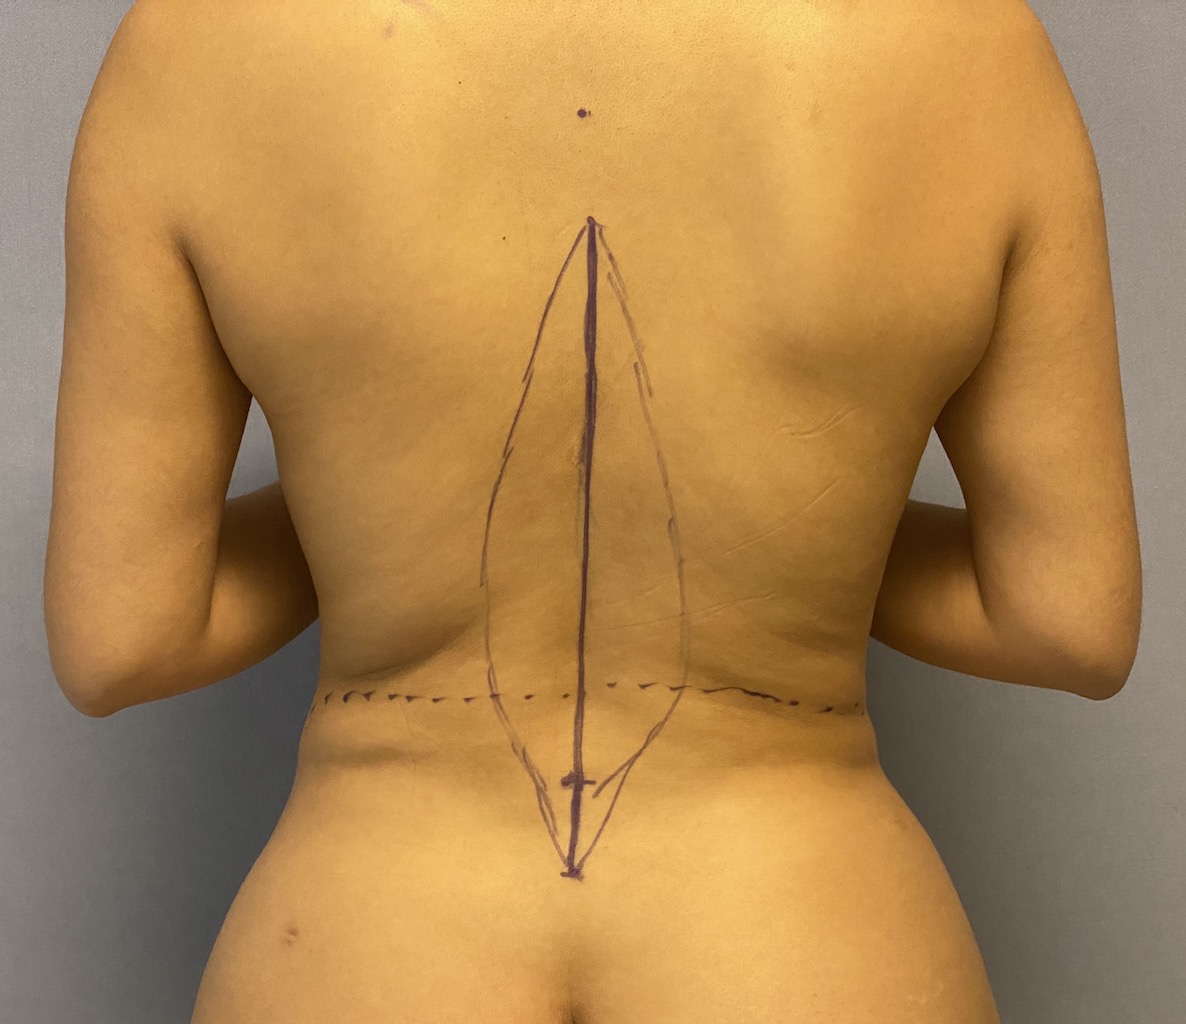 Plastic Surgery Case Study - The Vertical Backlift for Waistline